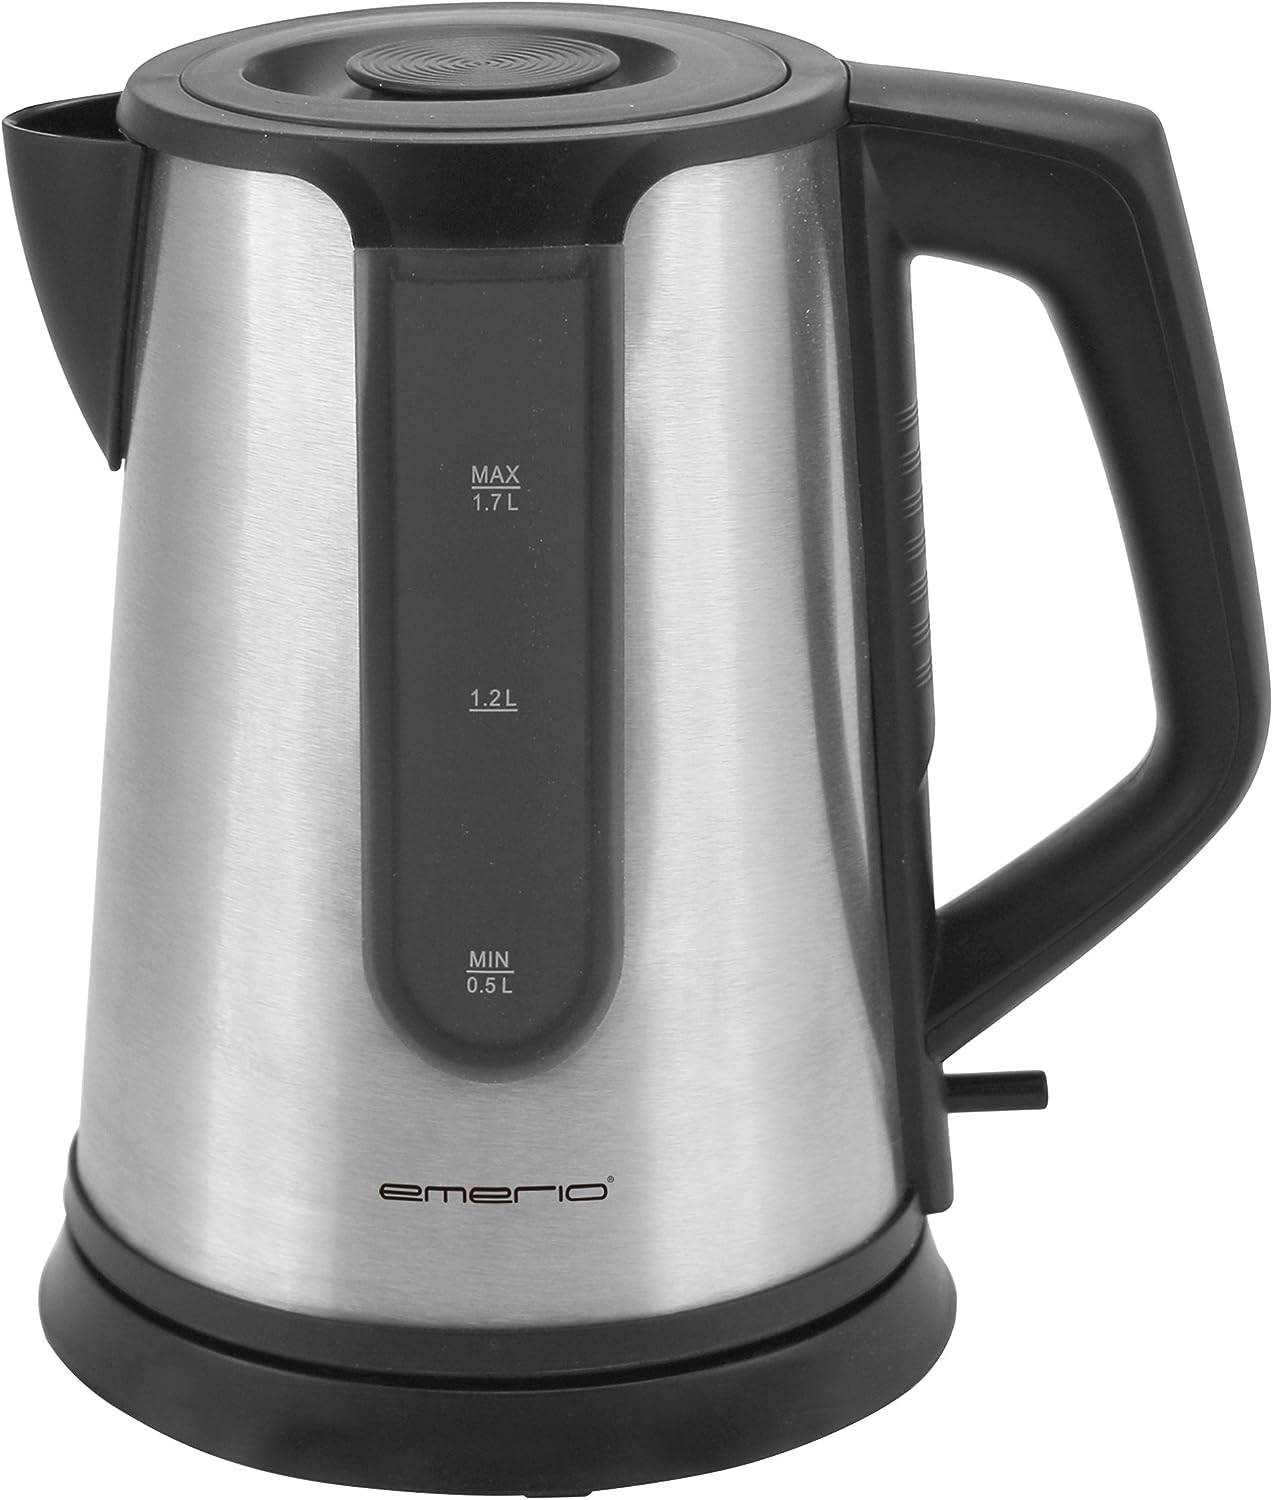 Emerio Kettle, 1.7 L, stainless steel, cool wall, 2200 W.